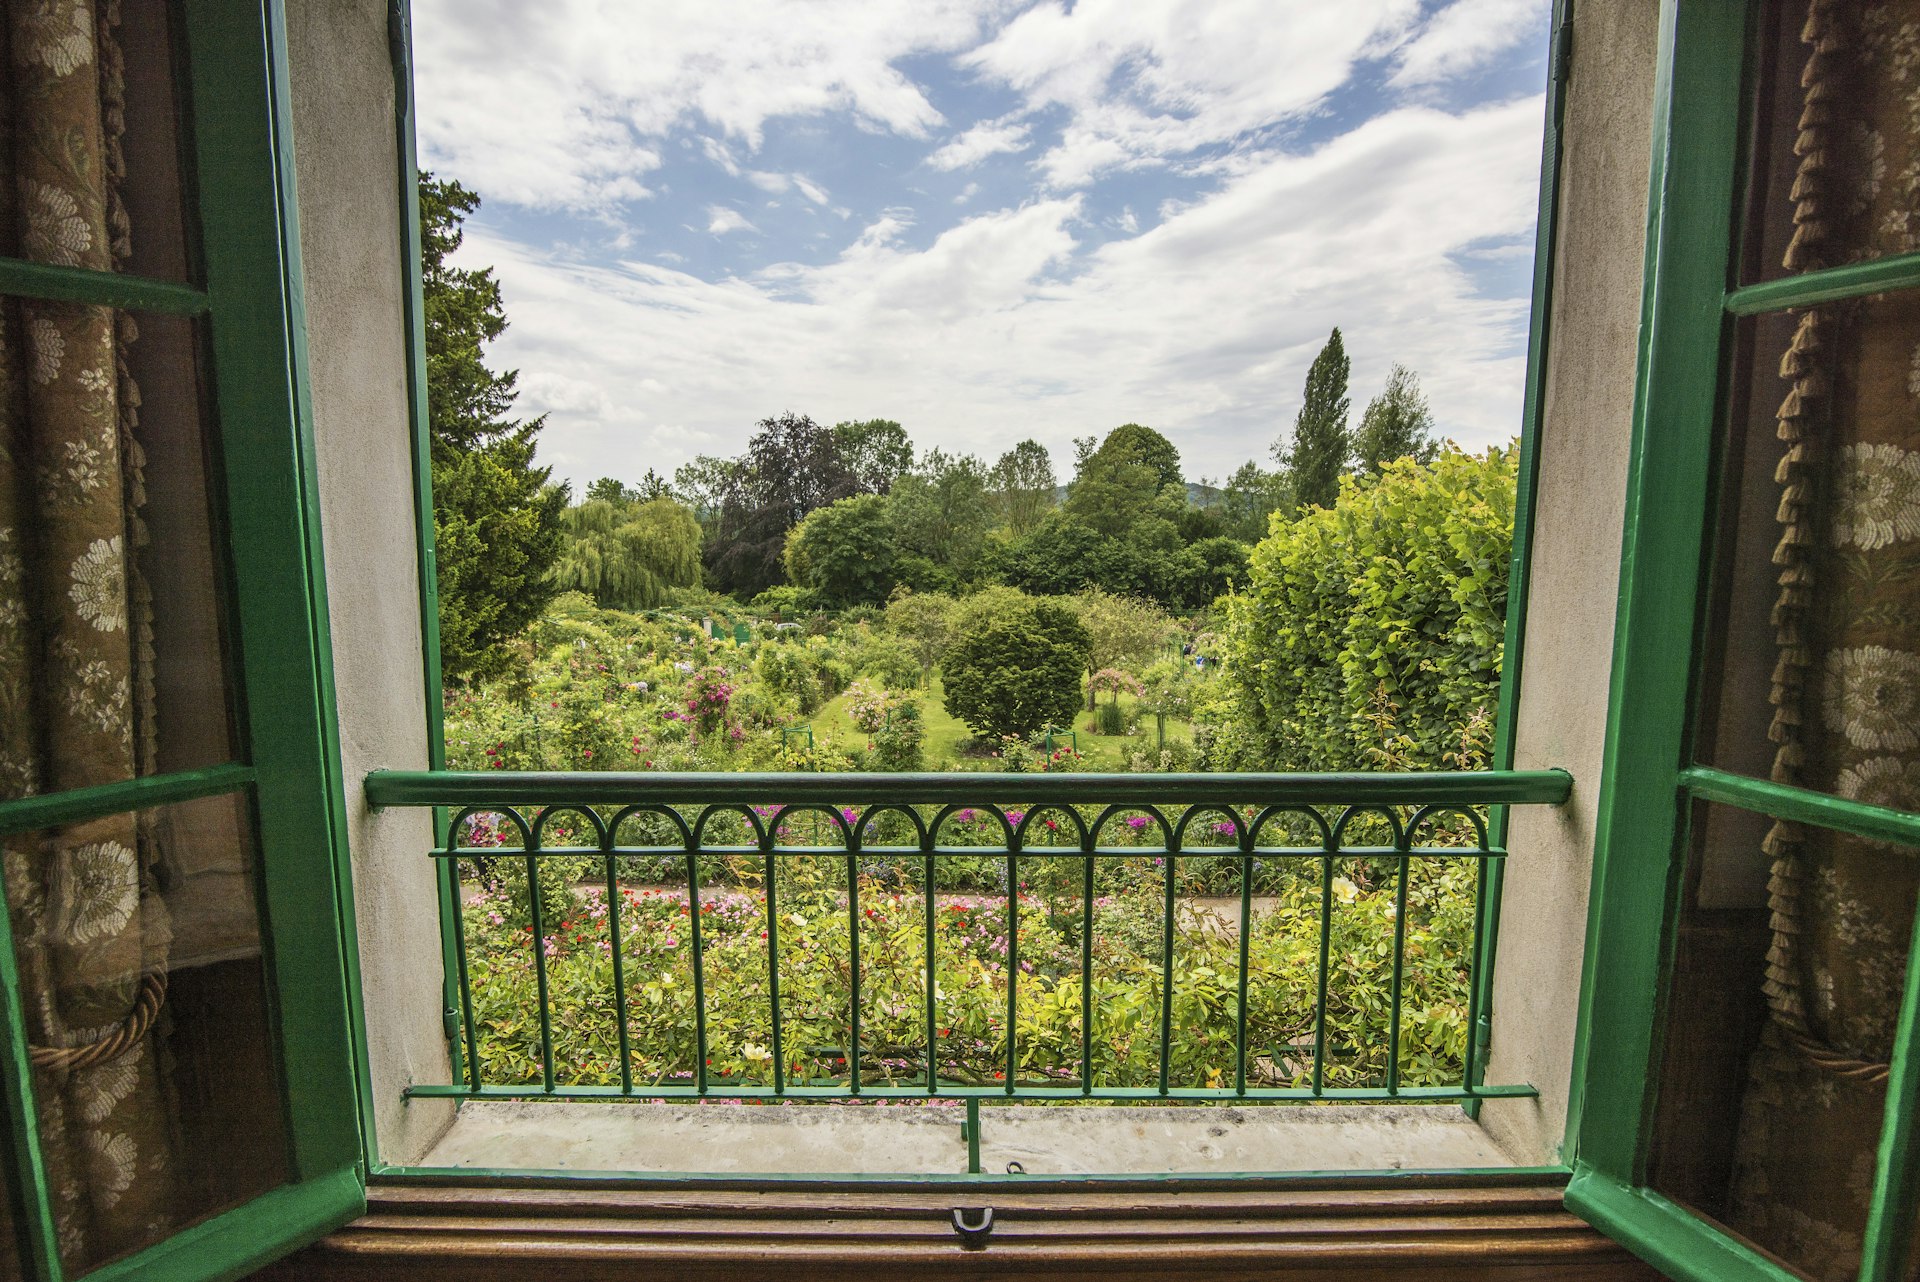 Beautiful garden blooms viewed through a large window with an ornate wrought-iron rail 